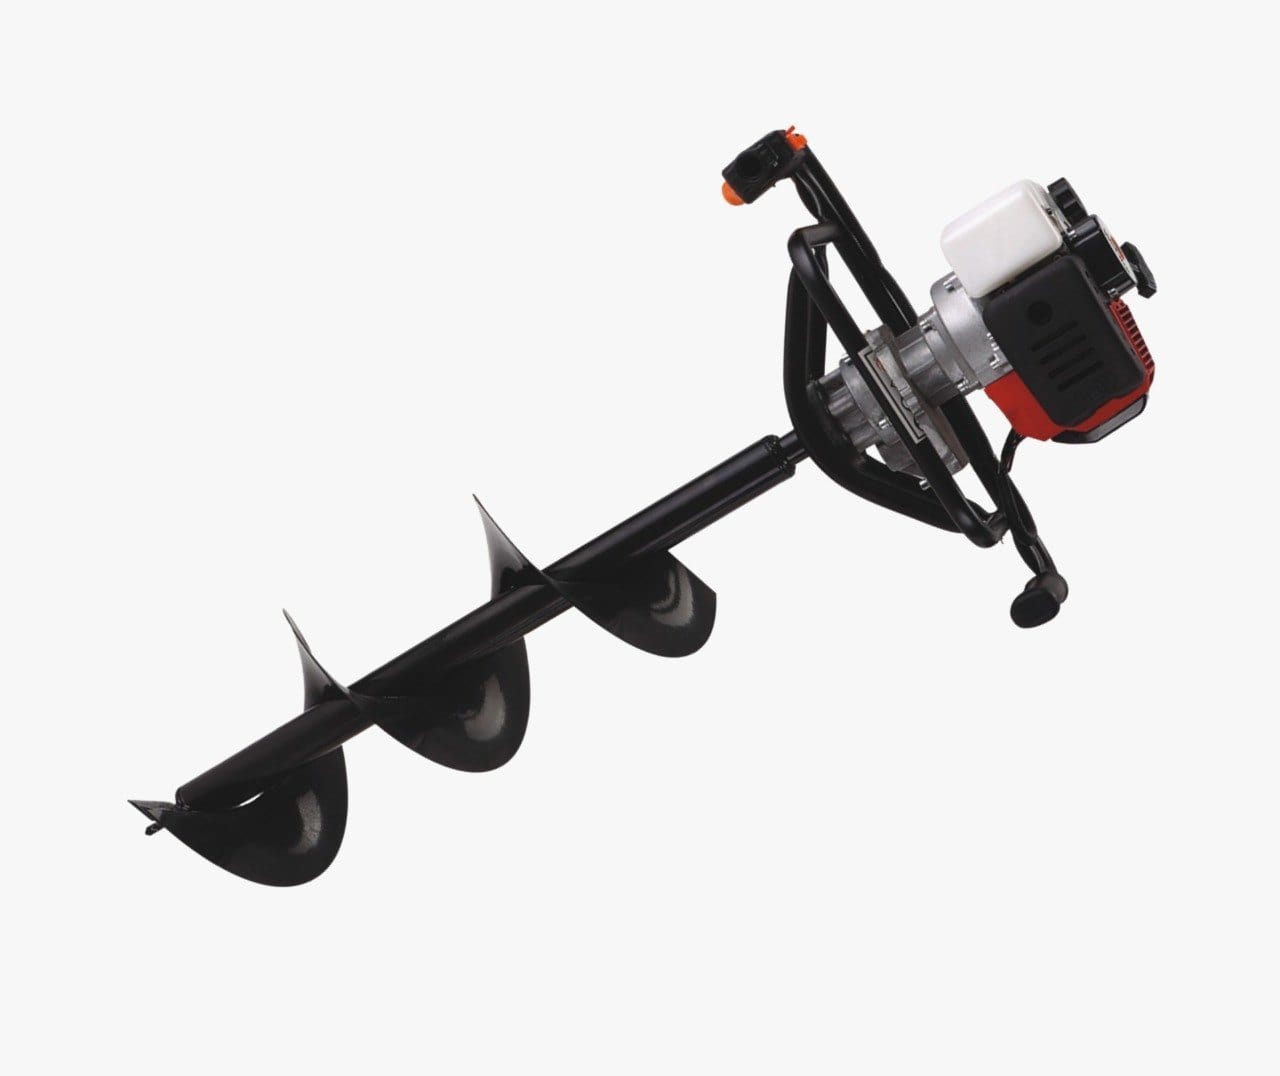 Buy Power Gasoline 52cc Earth Auger with Auger Bit 150x800mm - SD-520 | Shop at Supply Master Accra, Ghana Auger Buy Tools hardware Building materials